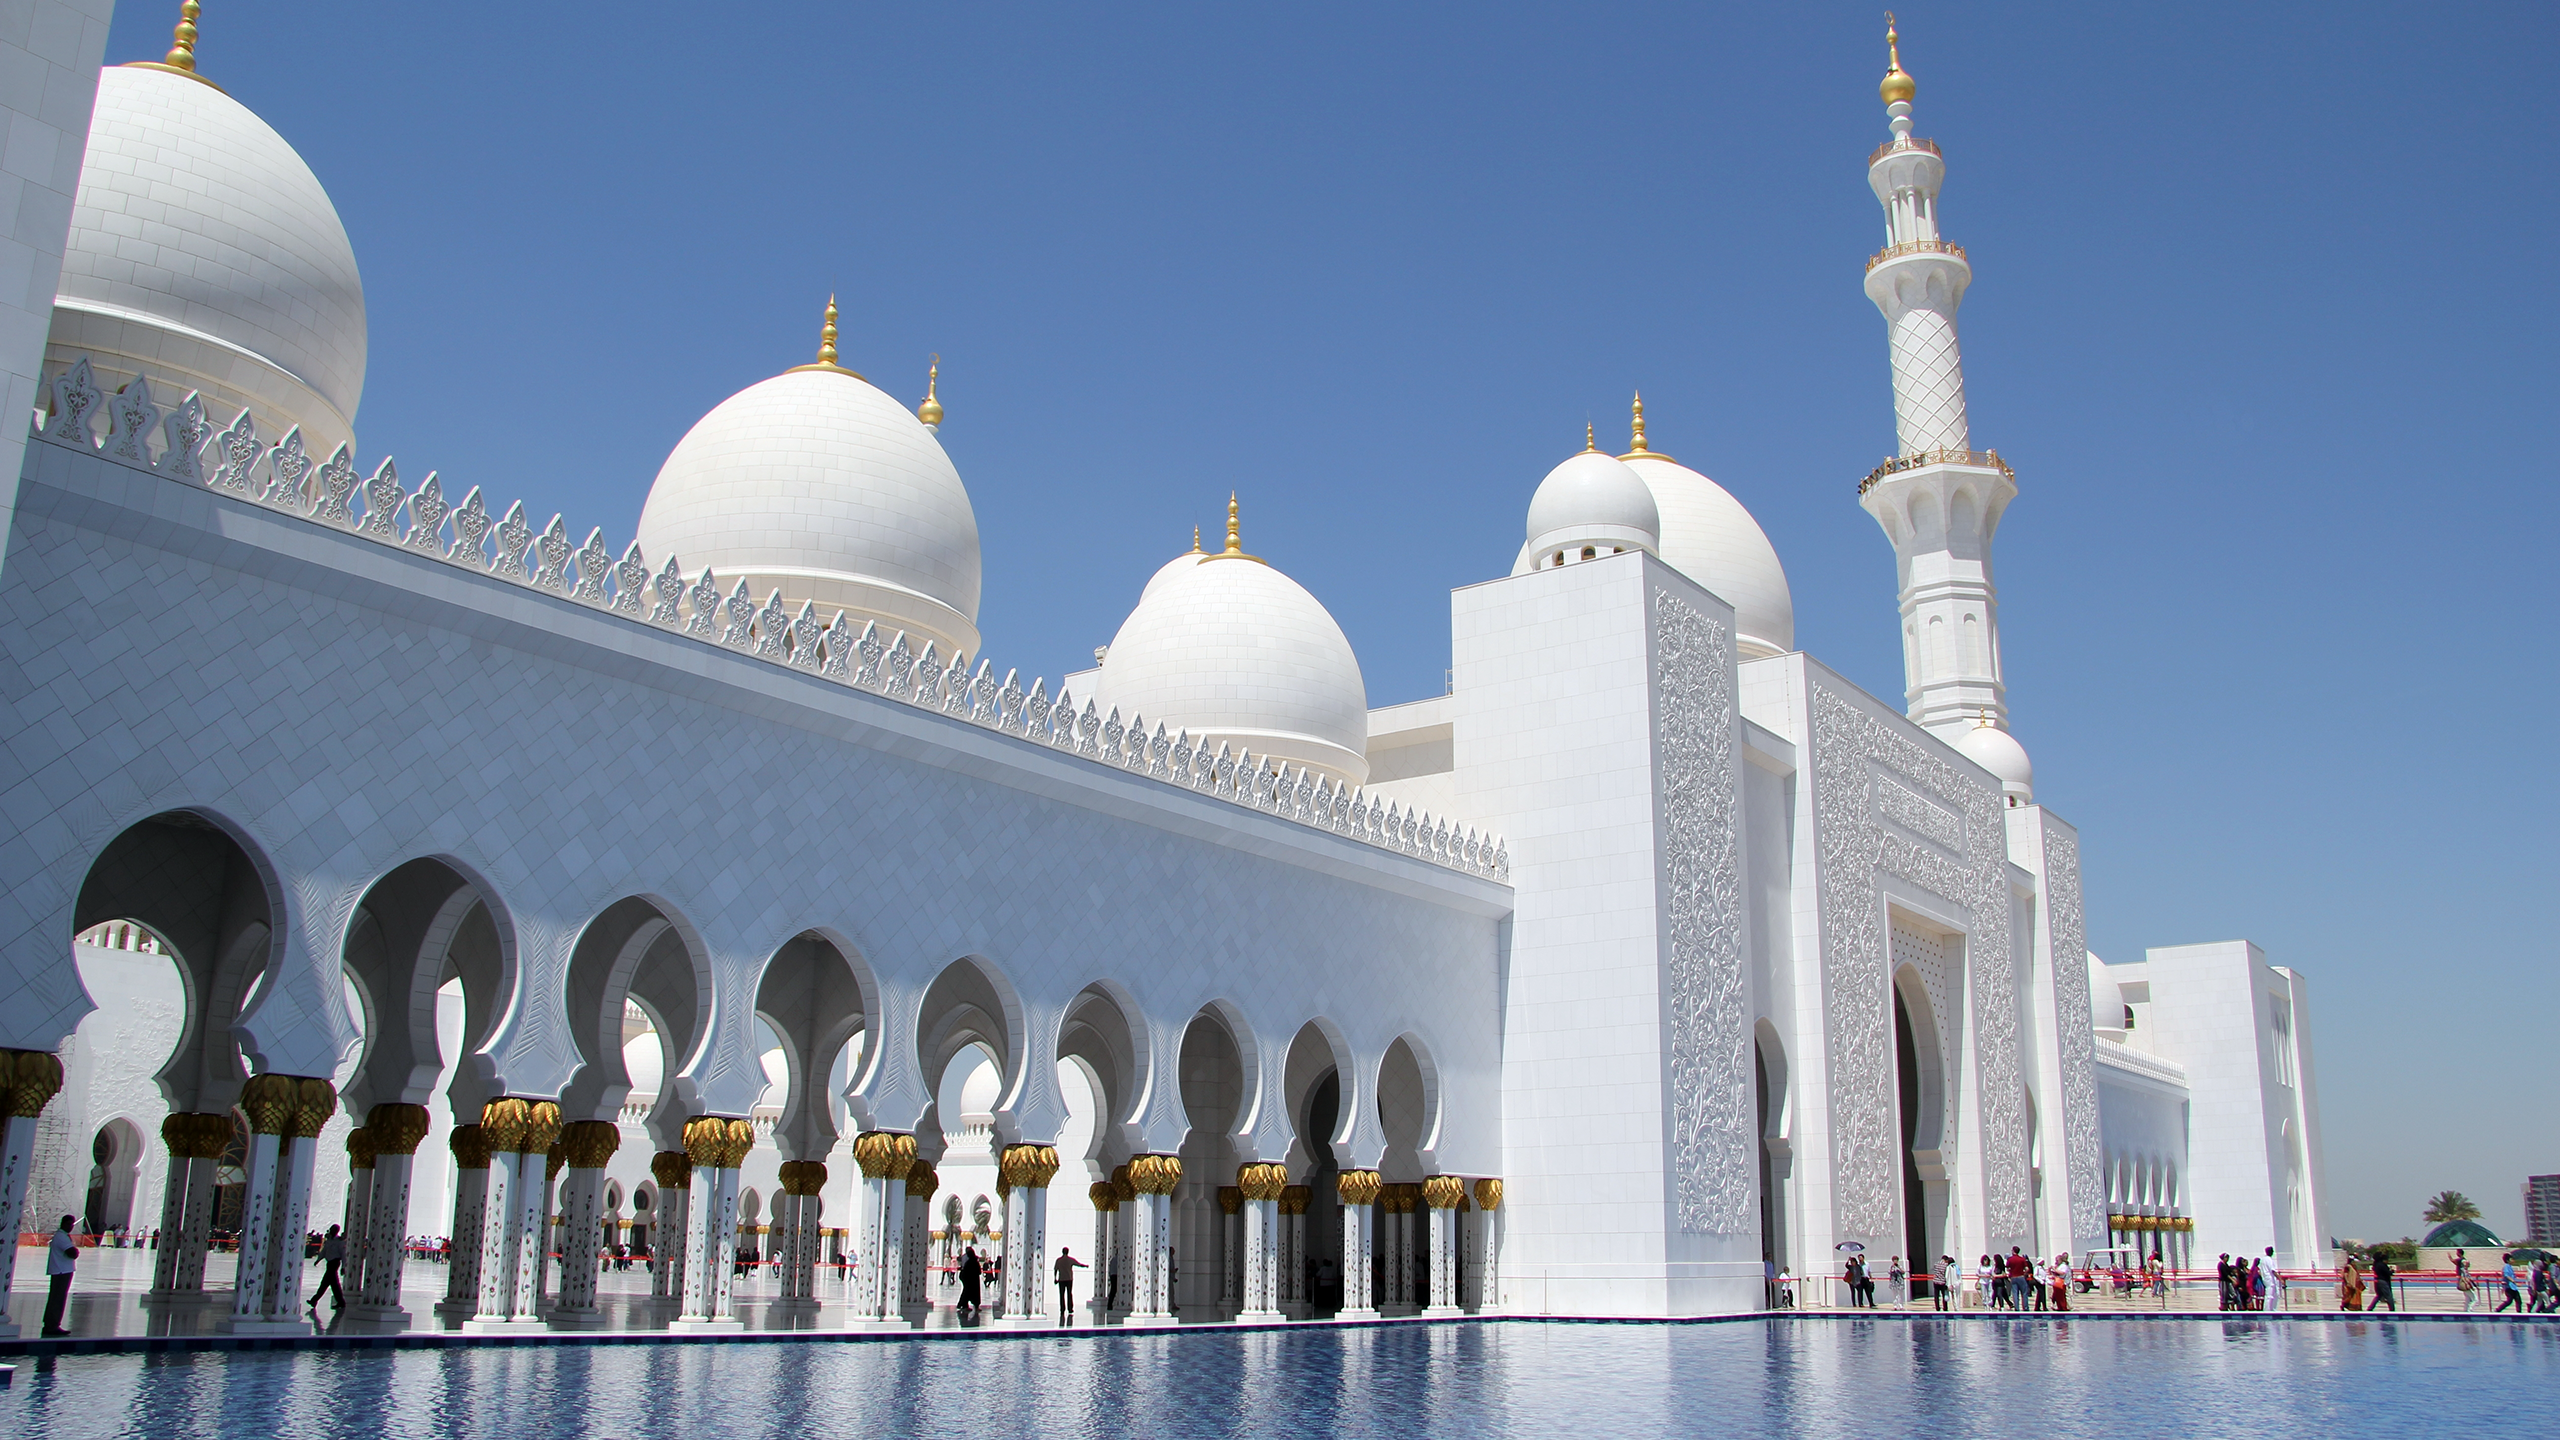 General 2560x1440 Abu Dhabi Islamic architecture architecture sunlight arch marble mosque United Arab Emirates